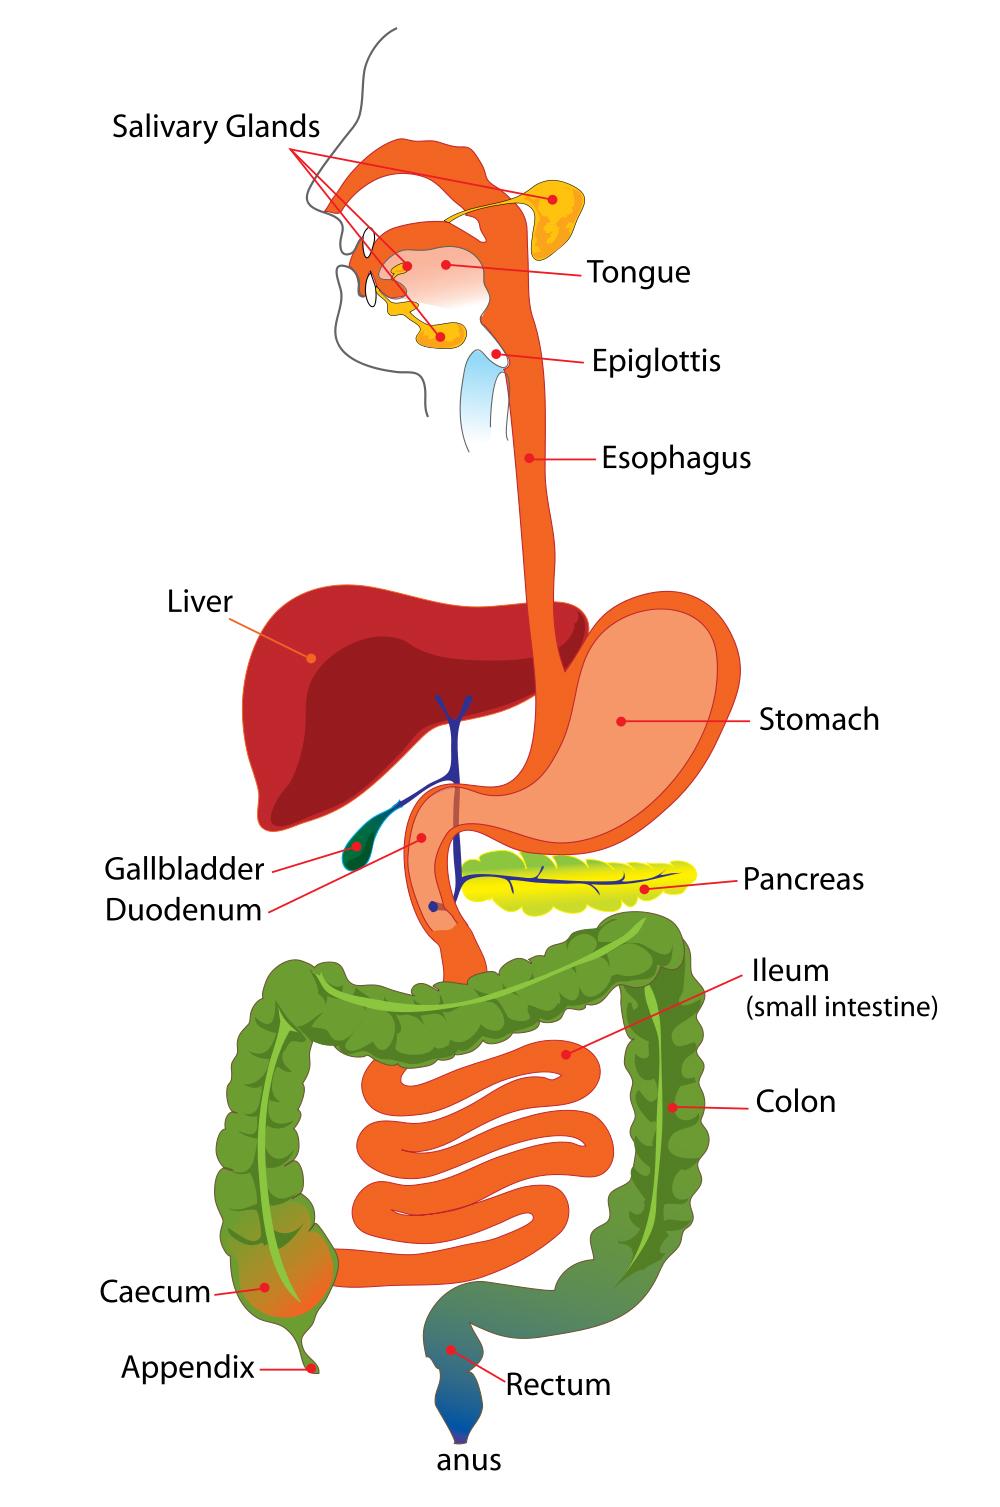 The digestive system includes